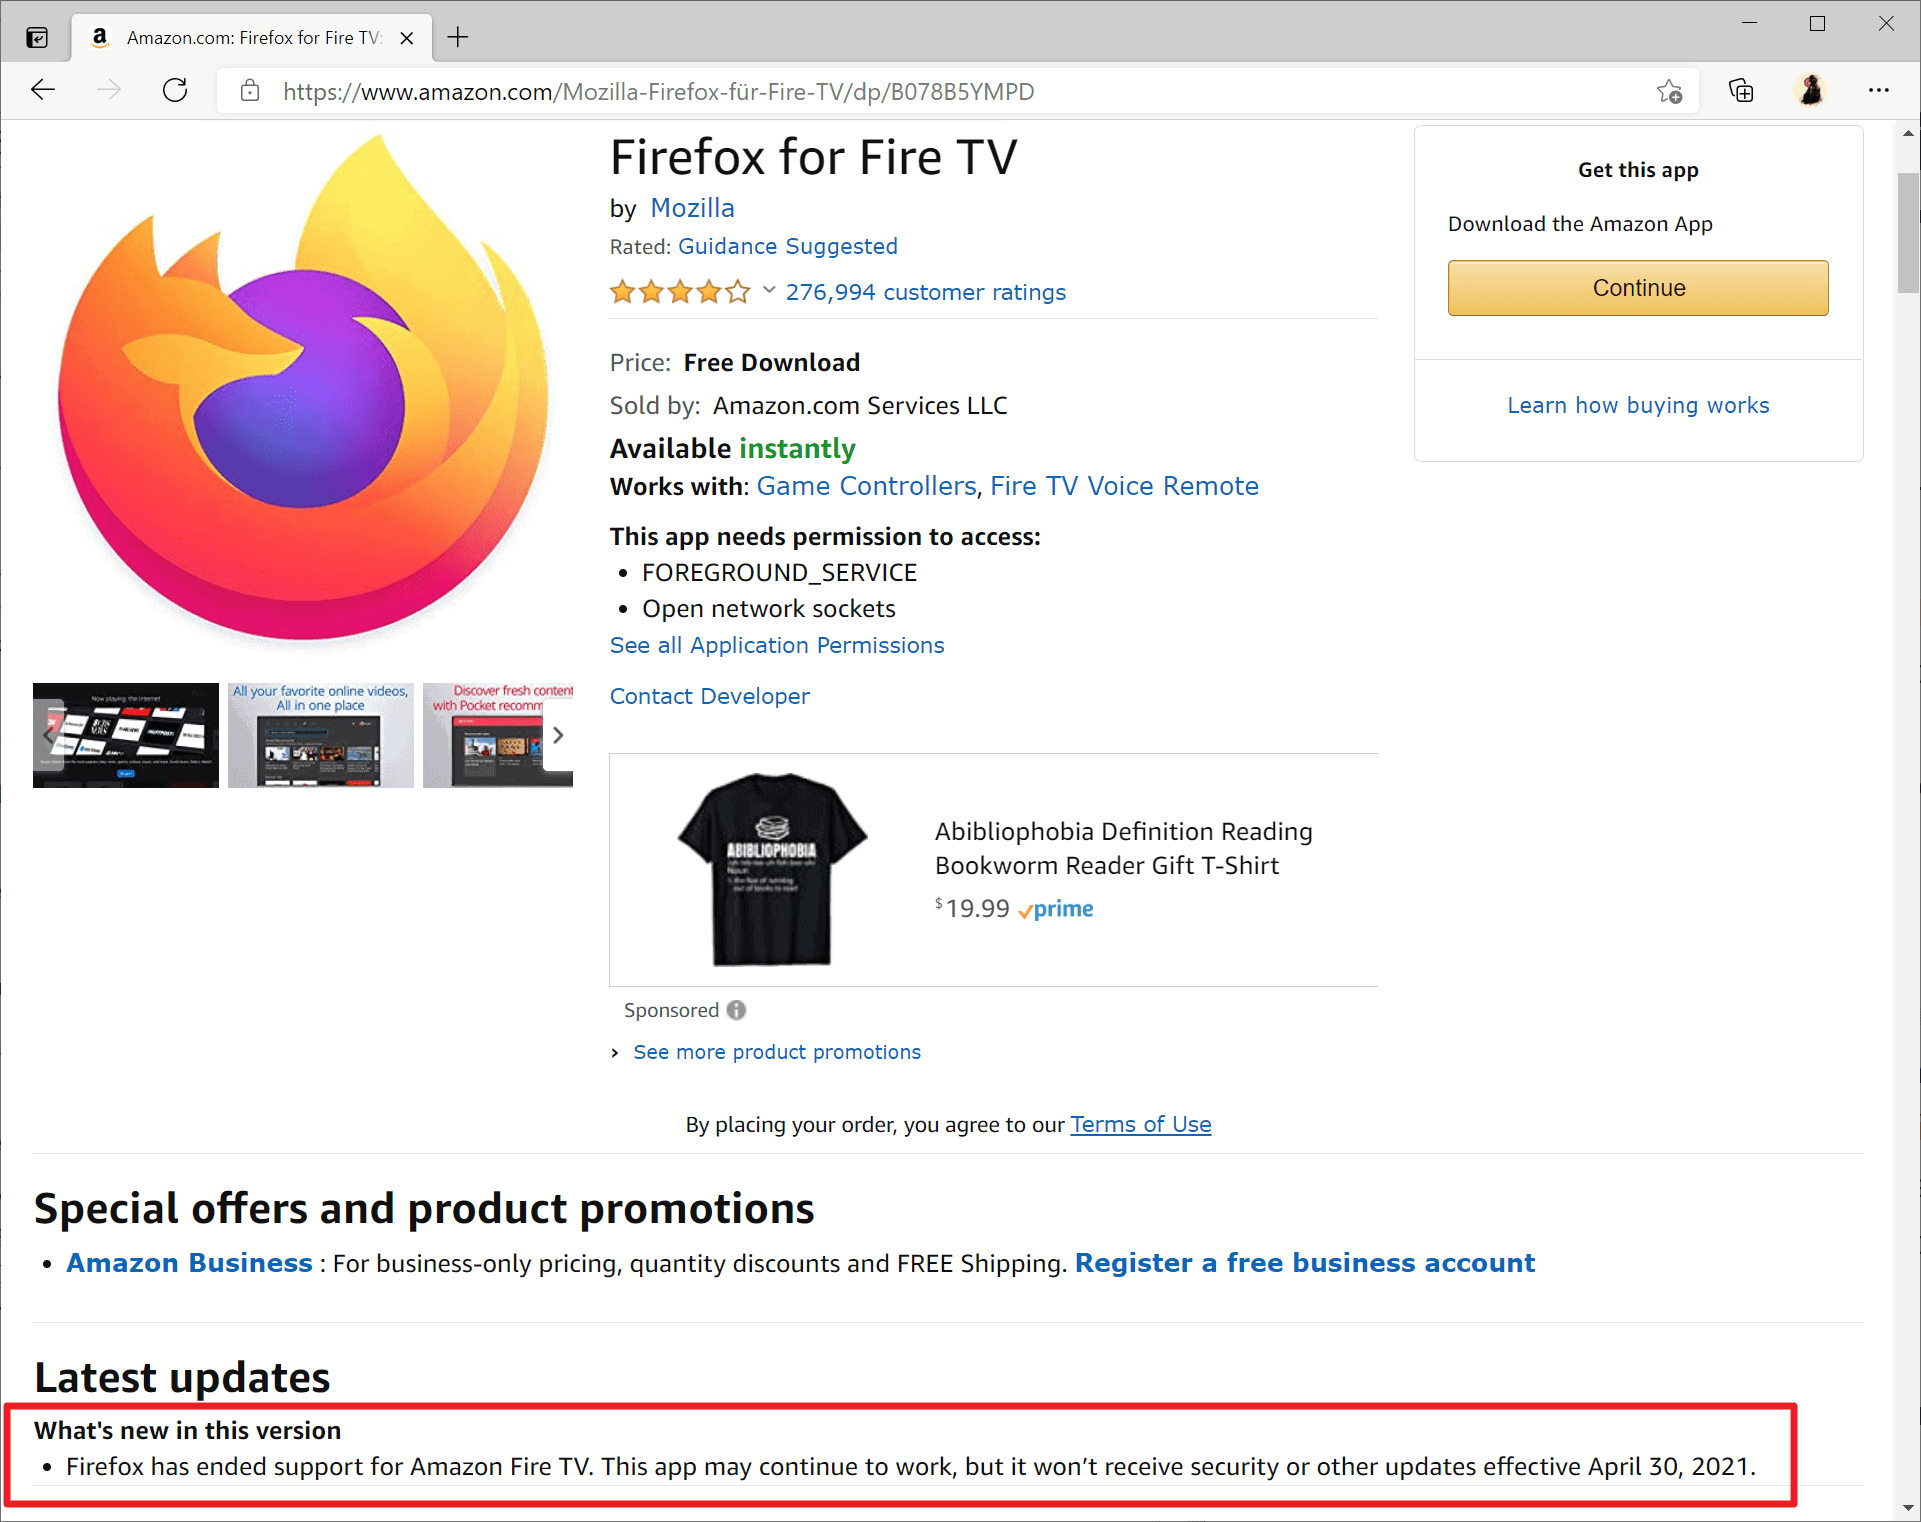 Firefox for Fire TV and Echo Show will be discontinued